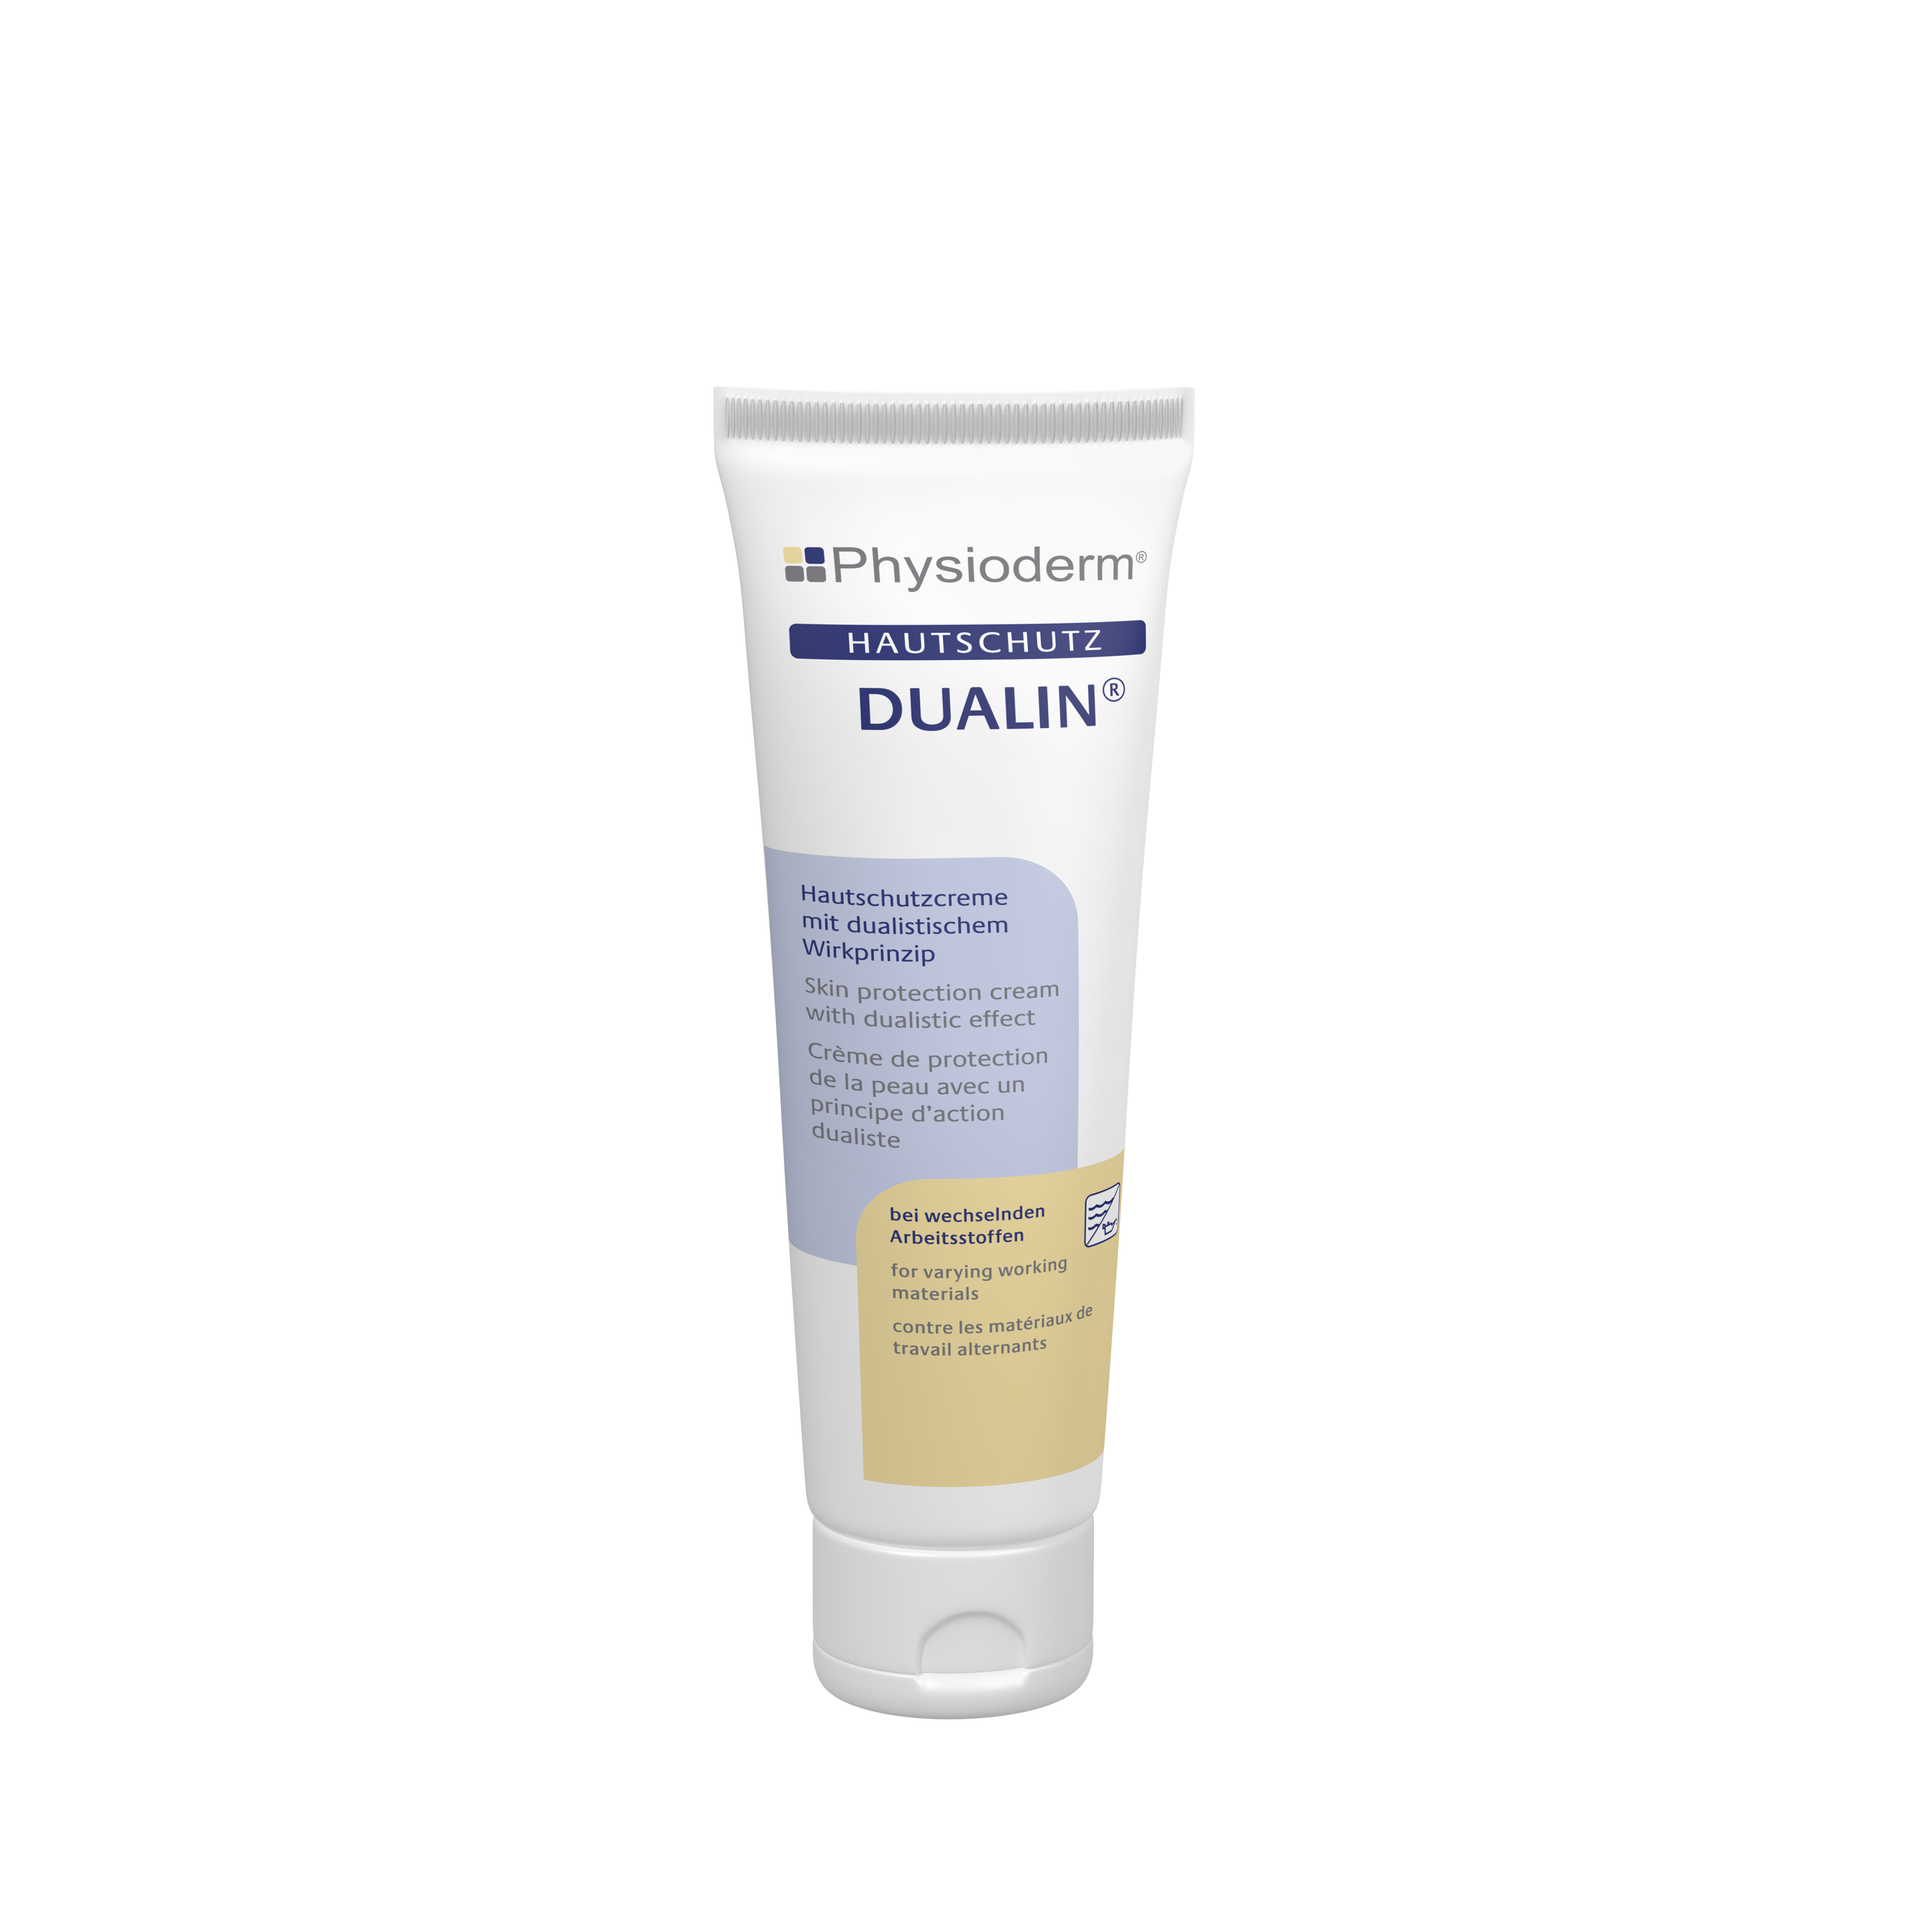  Physioderm  Daulin 100ml Tube (Varying Working Materials), Skin Protection